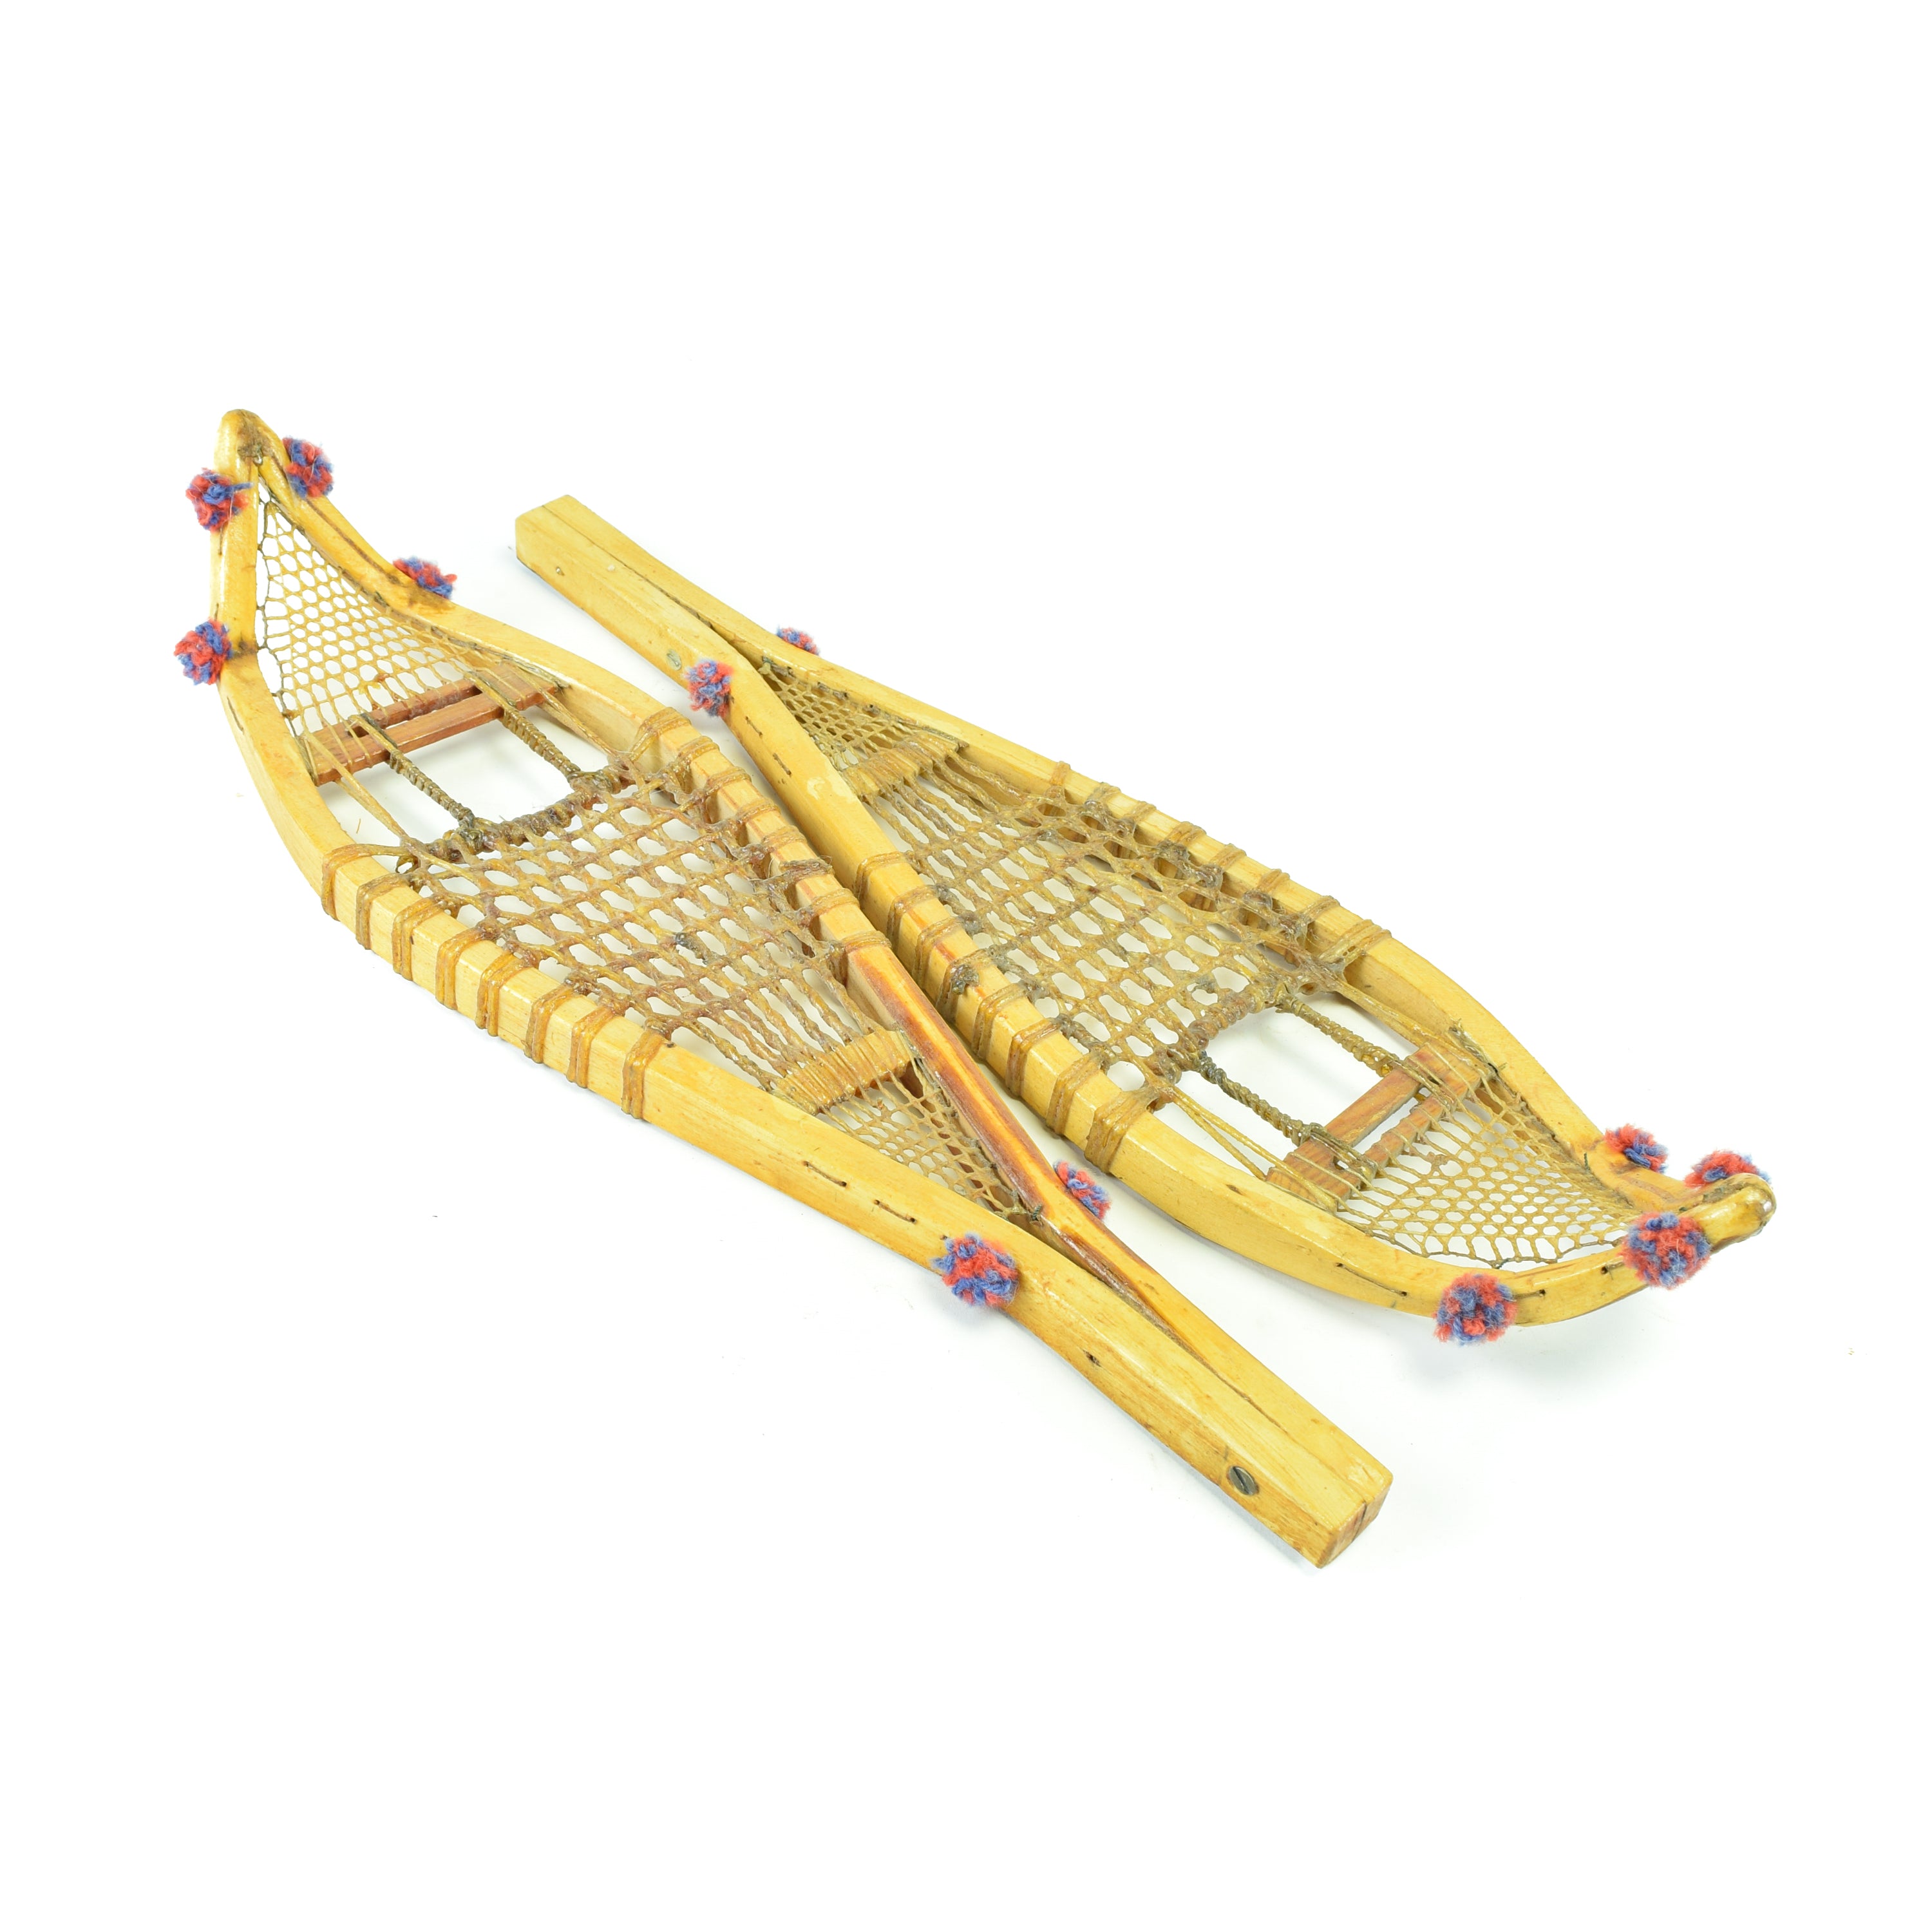 Cree Child's Snowshoes